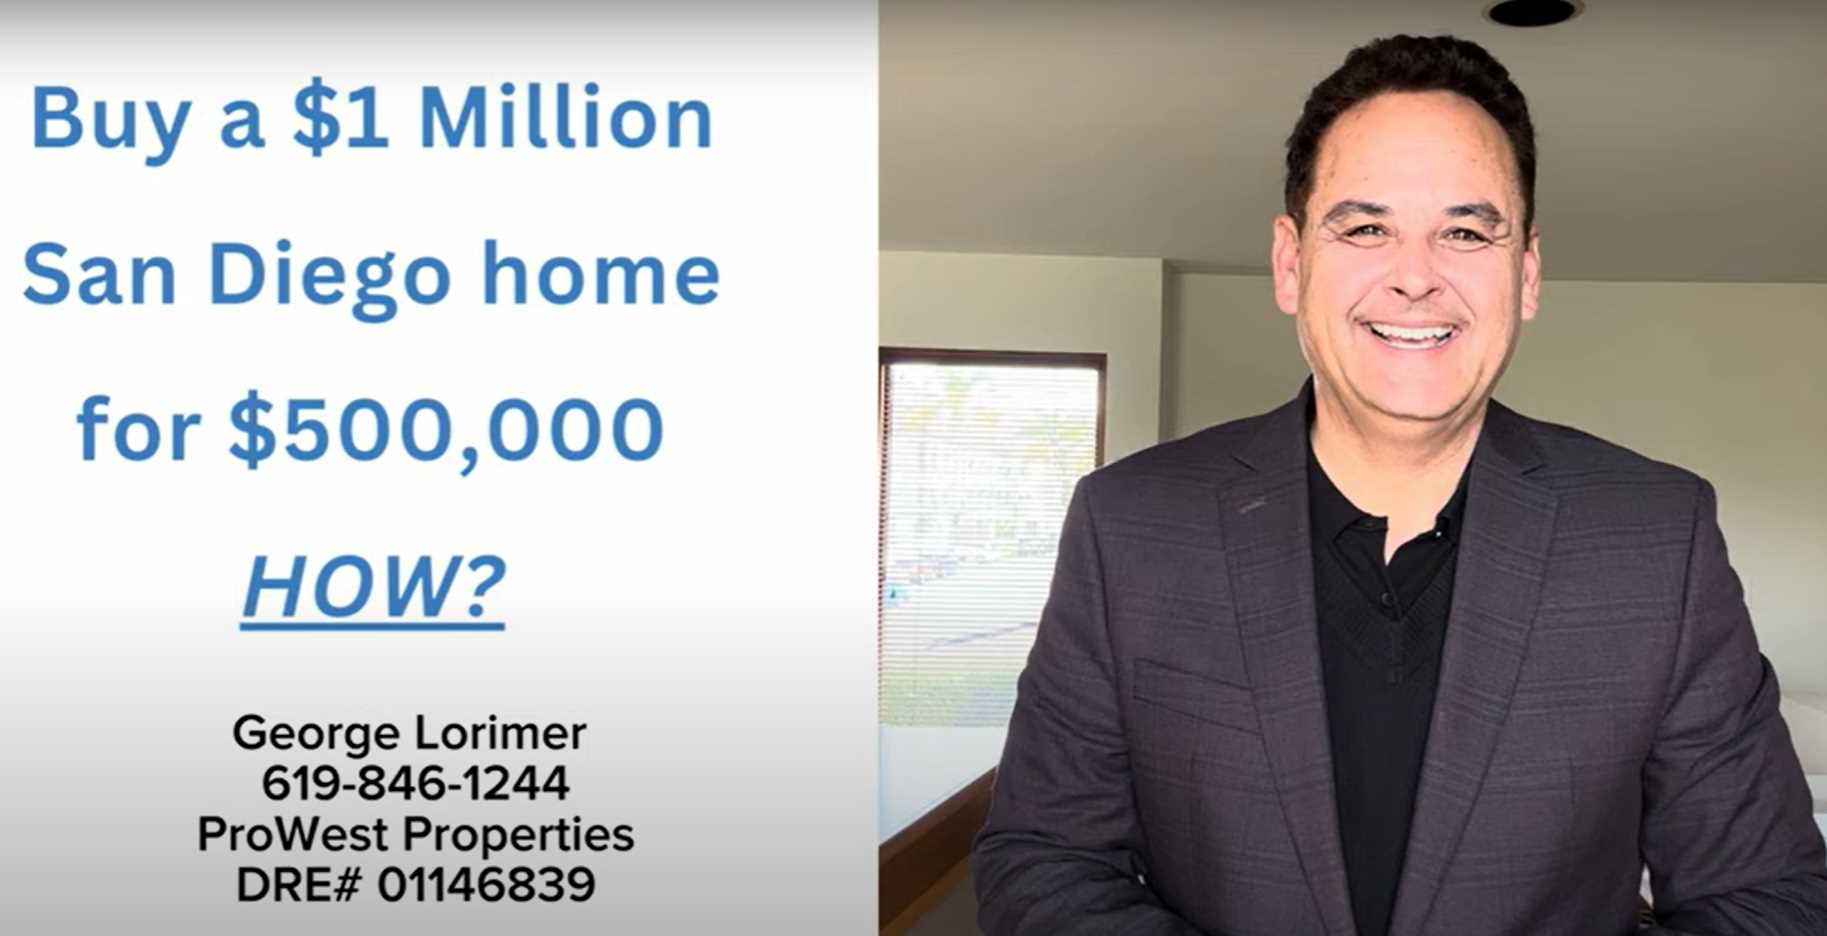 Buying a $1,000,000 San Diego property for $500,000